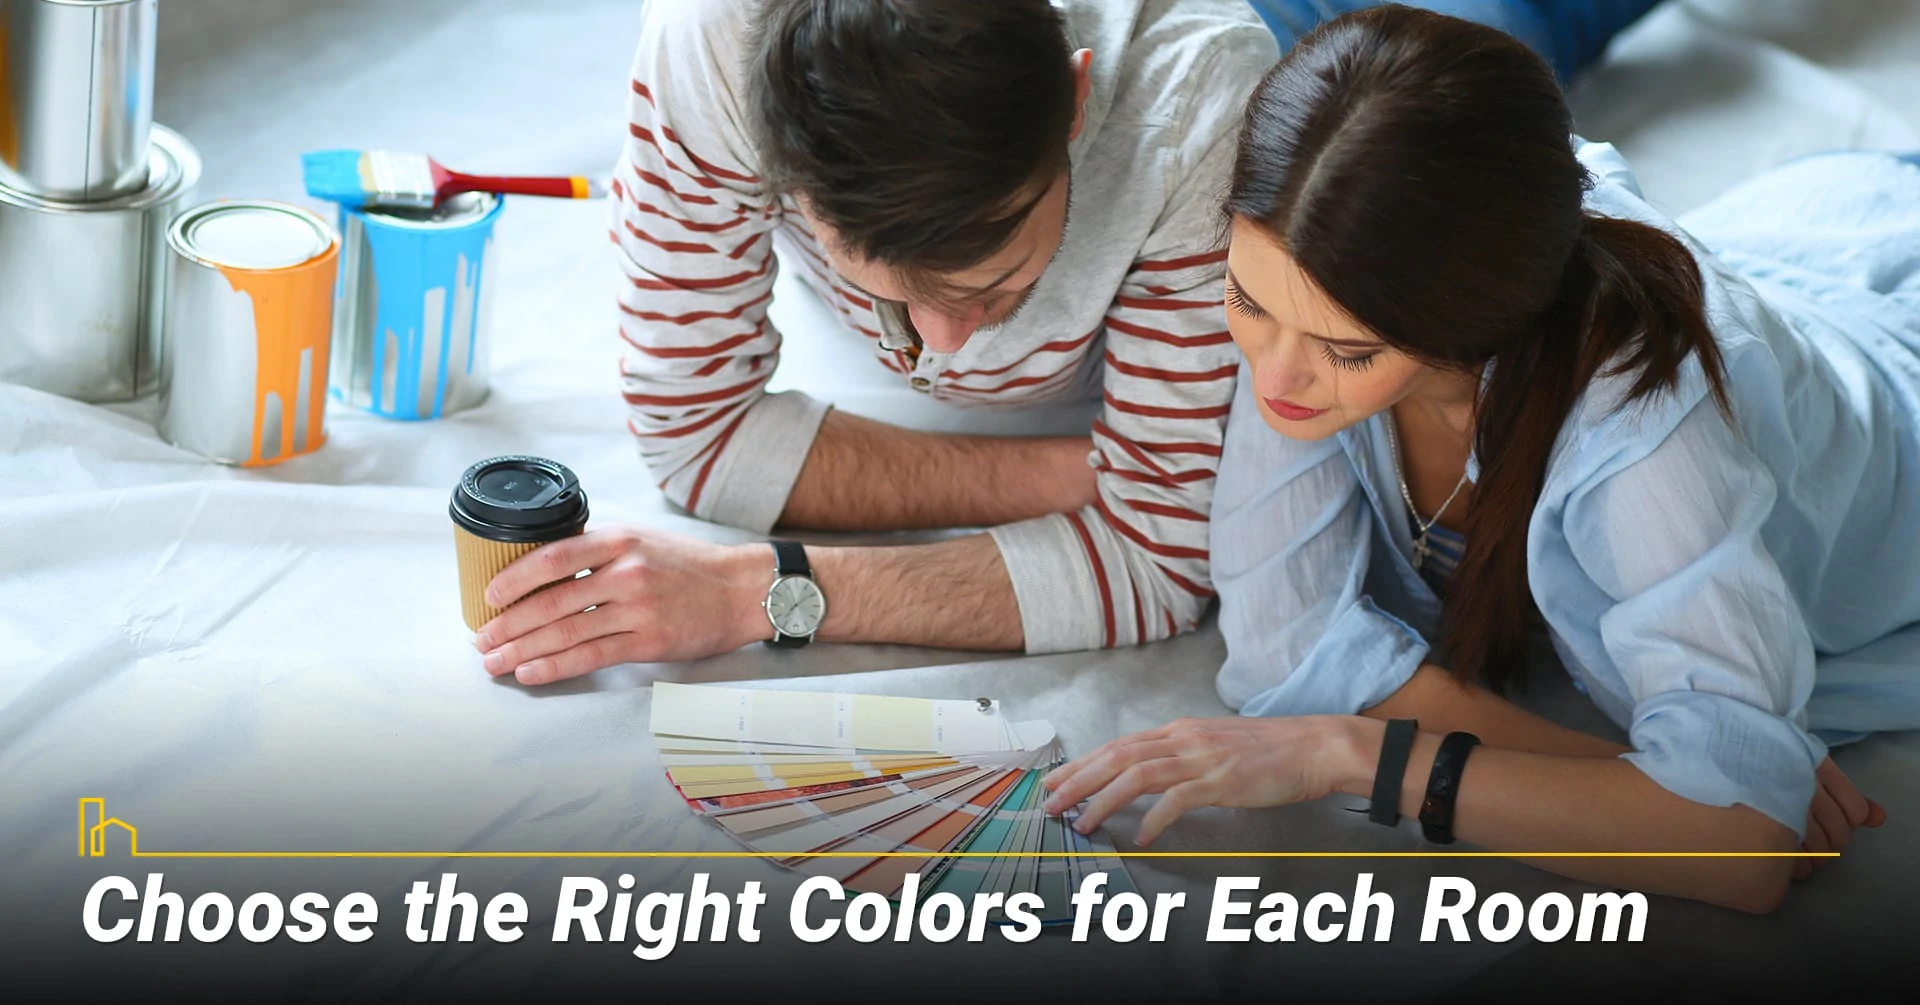 Choose the Right Colors for Each Room, customize color for each room